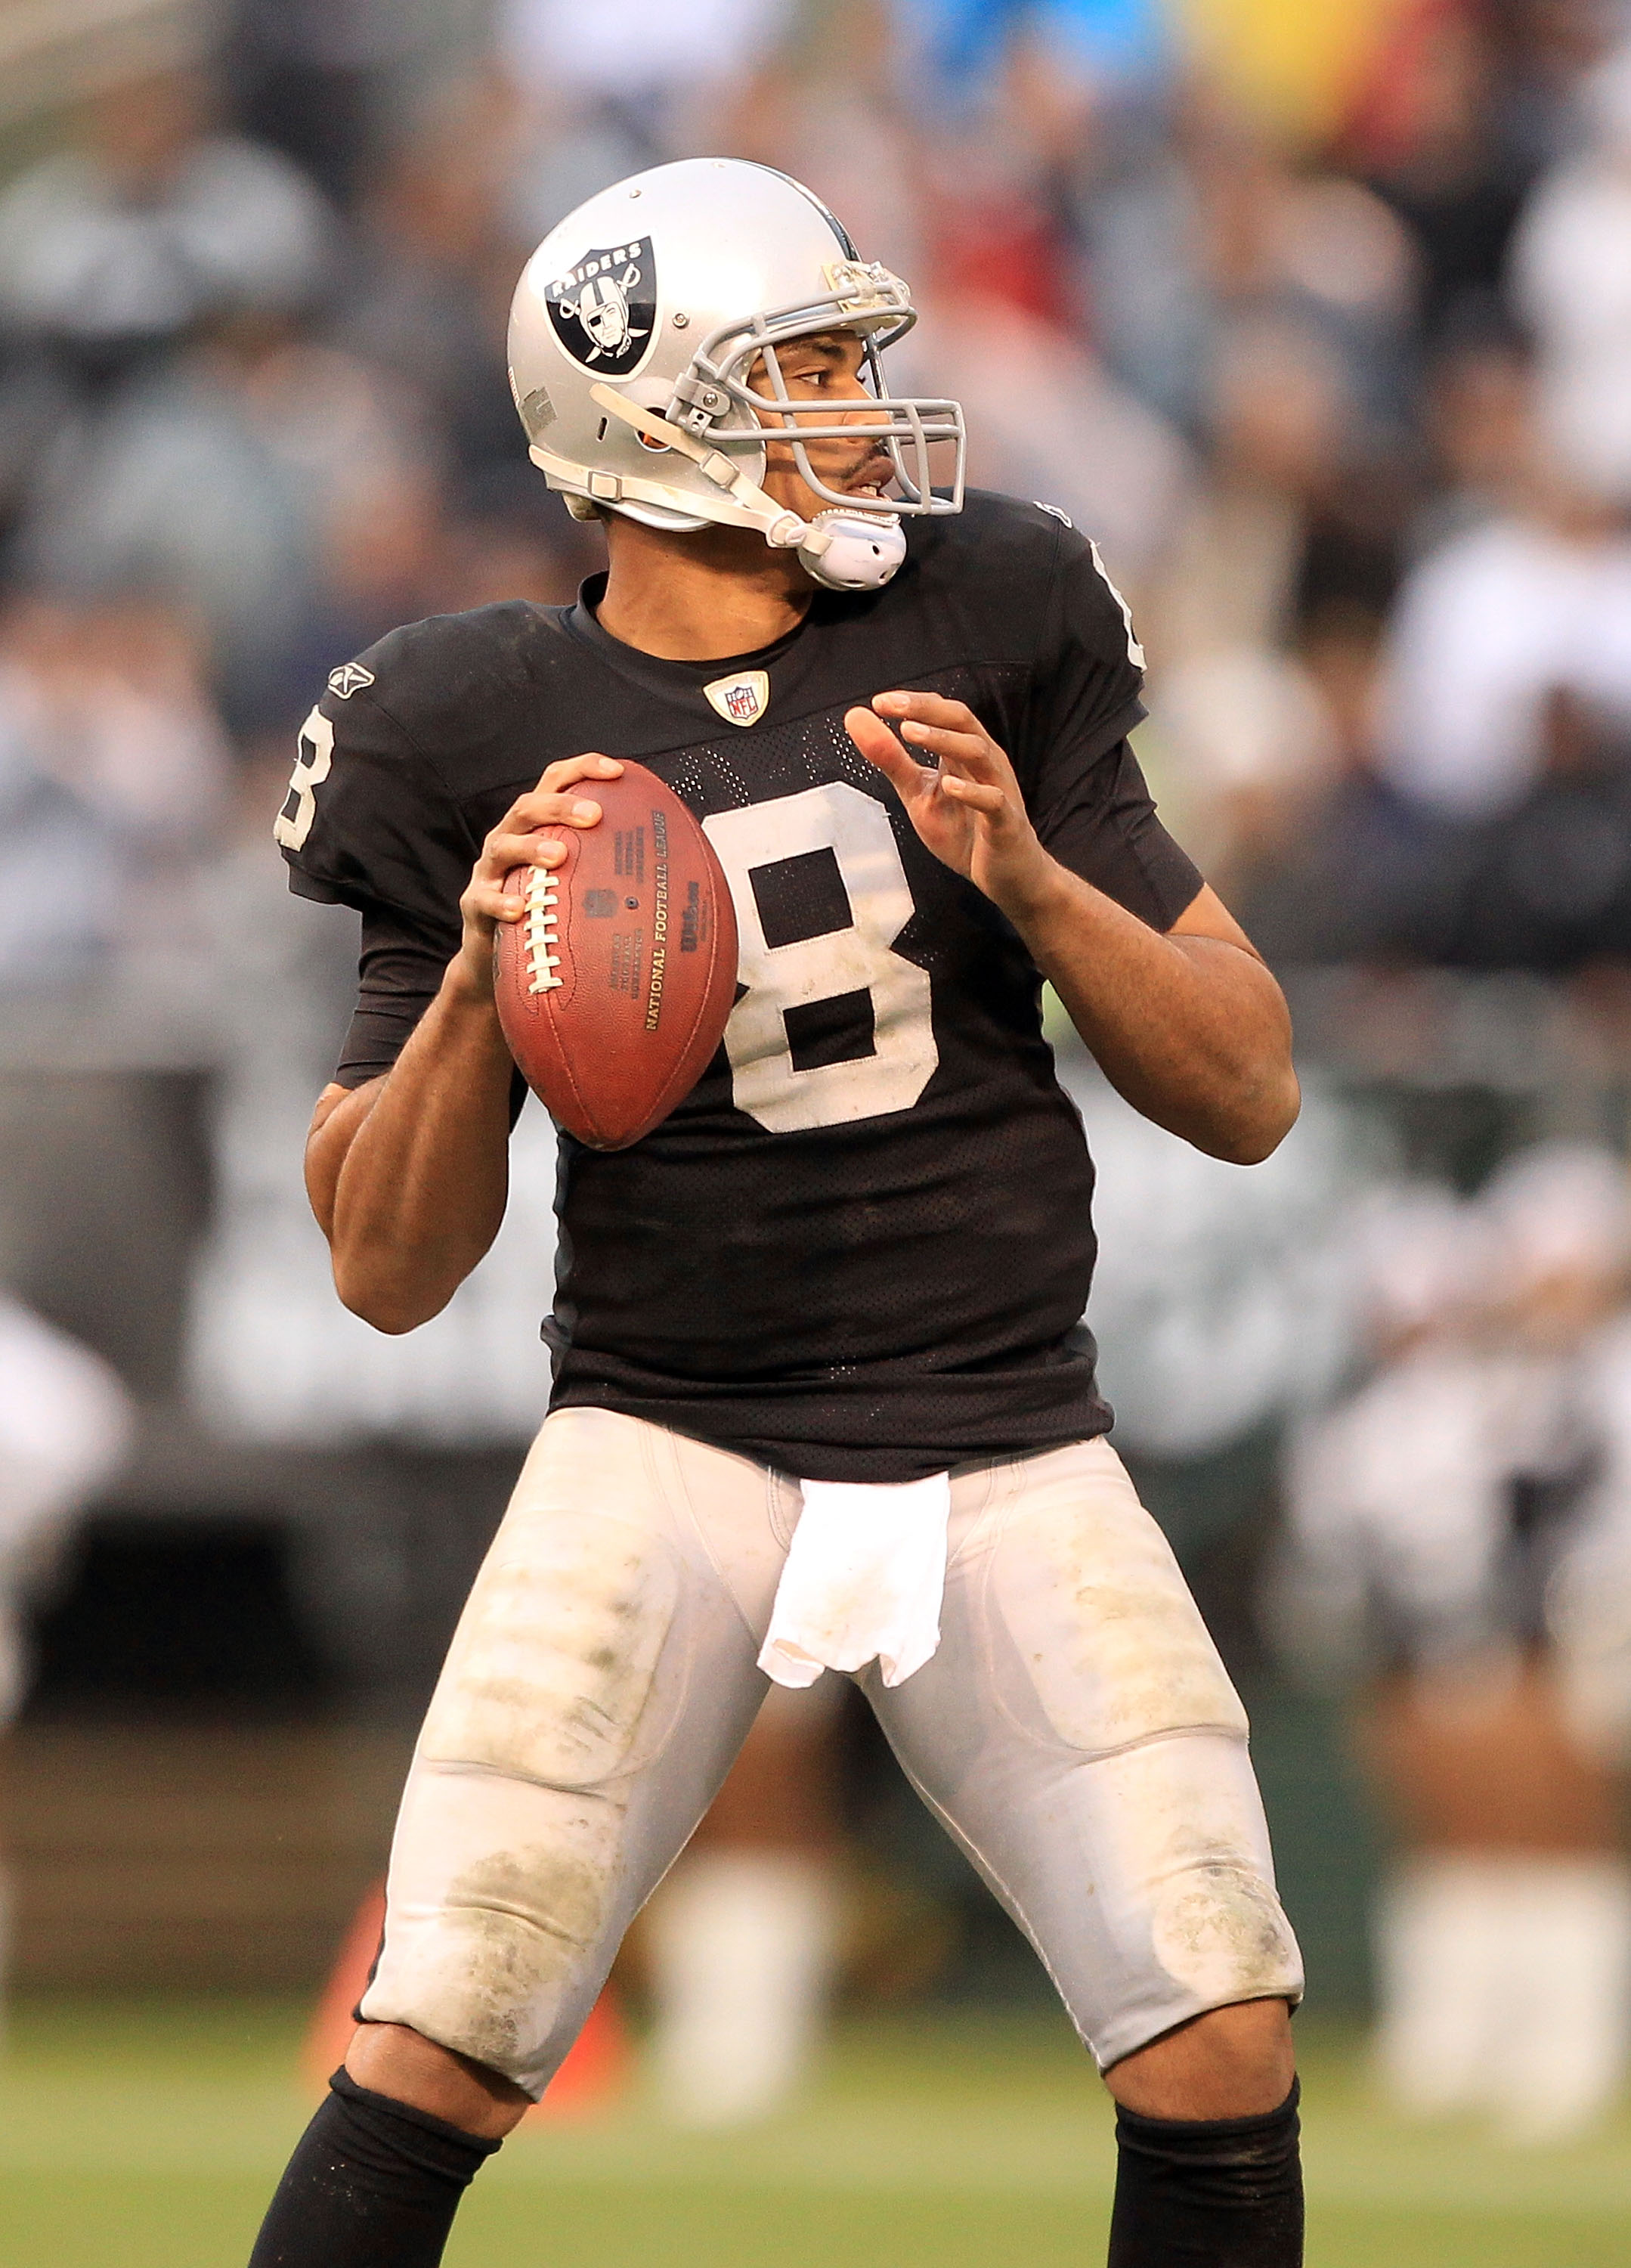 OAKLAND, CA - DECEMBER 19:  Jason Campbell #8 of the Oakland Raiders in action against the Denver Broncos at Oakland-Alameda County Coliseum on December 19, 2010 in Oakland, California.  (Photo by Ezra Shaw/Getty Images)